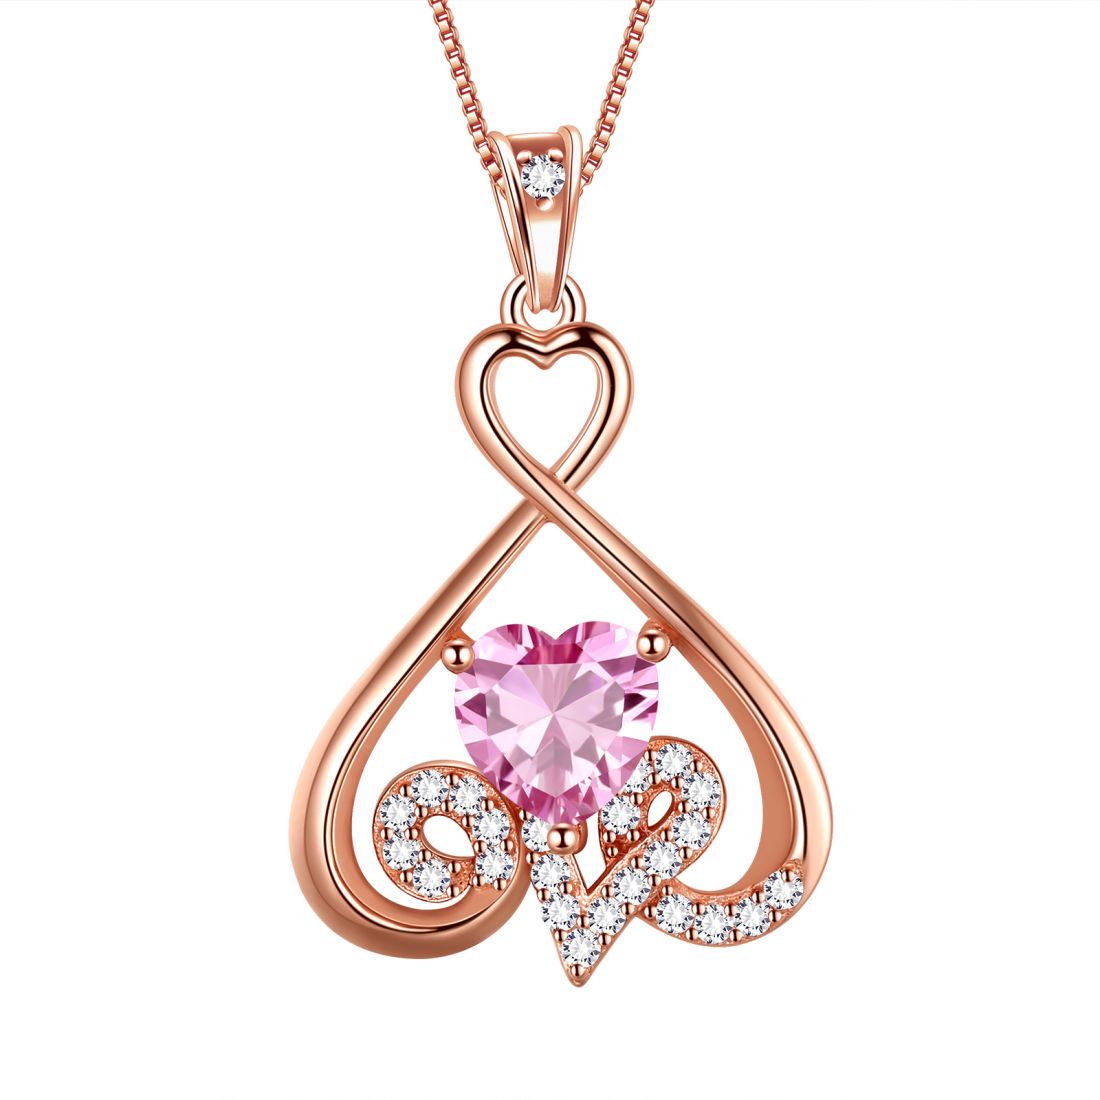 Heart Necklace Love Heart Oct. Birthstone Pendant Chain - Necklaces - Aurora Tears Jewelry